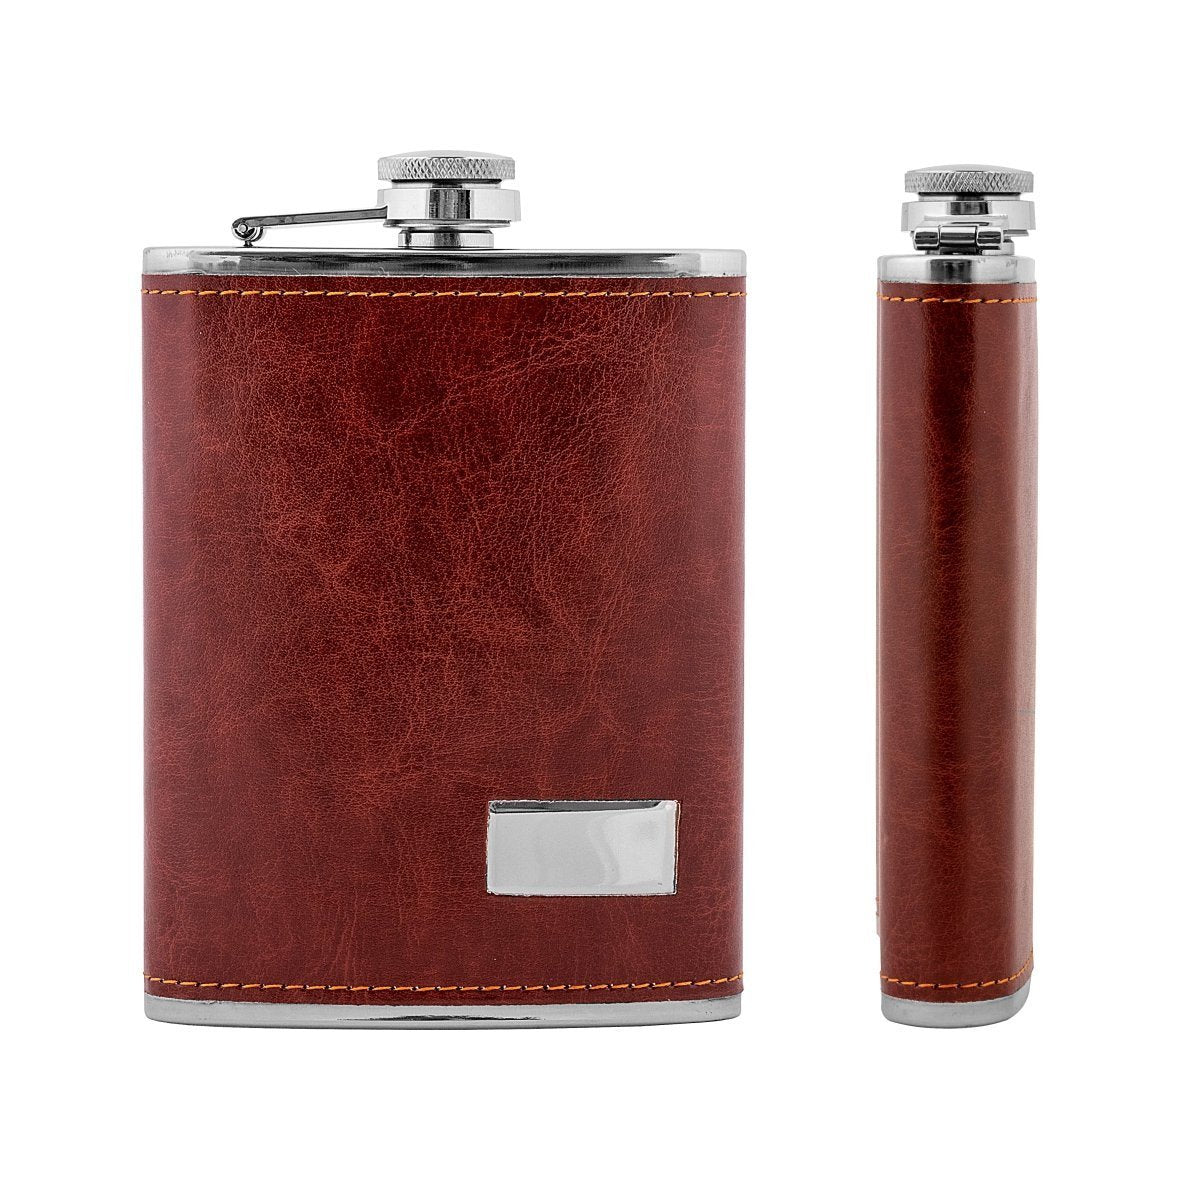 8 oz Maroon Stainless Steel Hip Flask for Bourbon, Whiskey, Vodka Set of Three